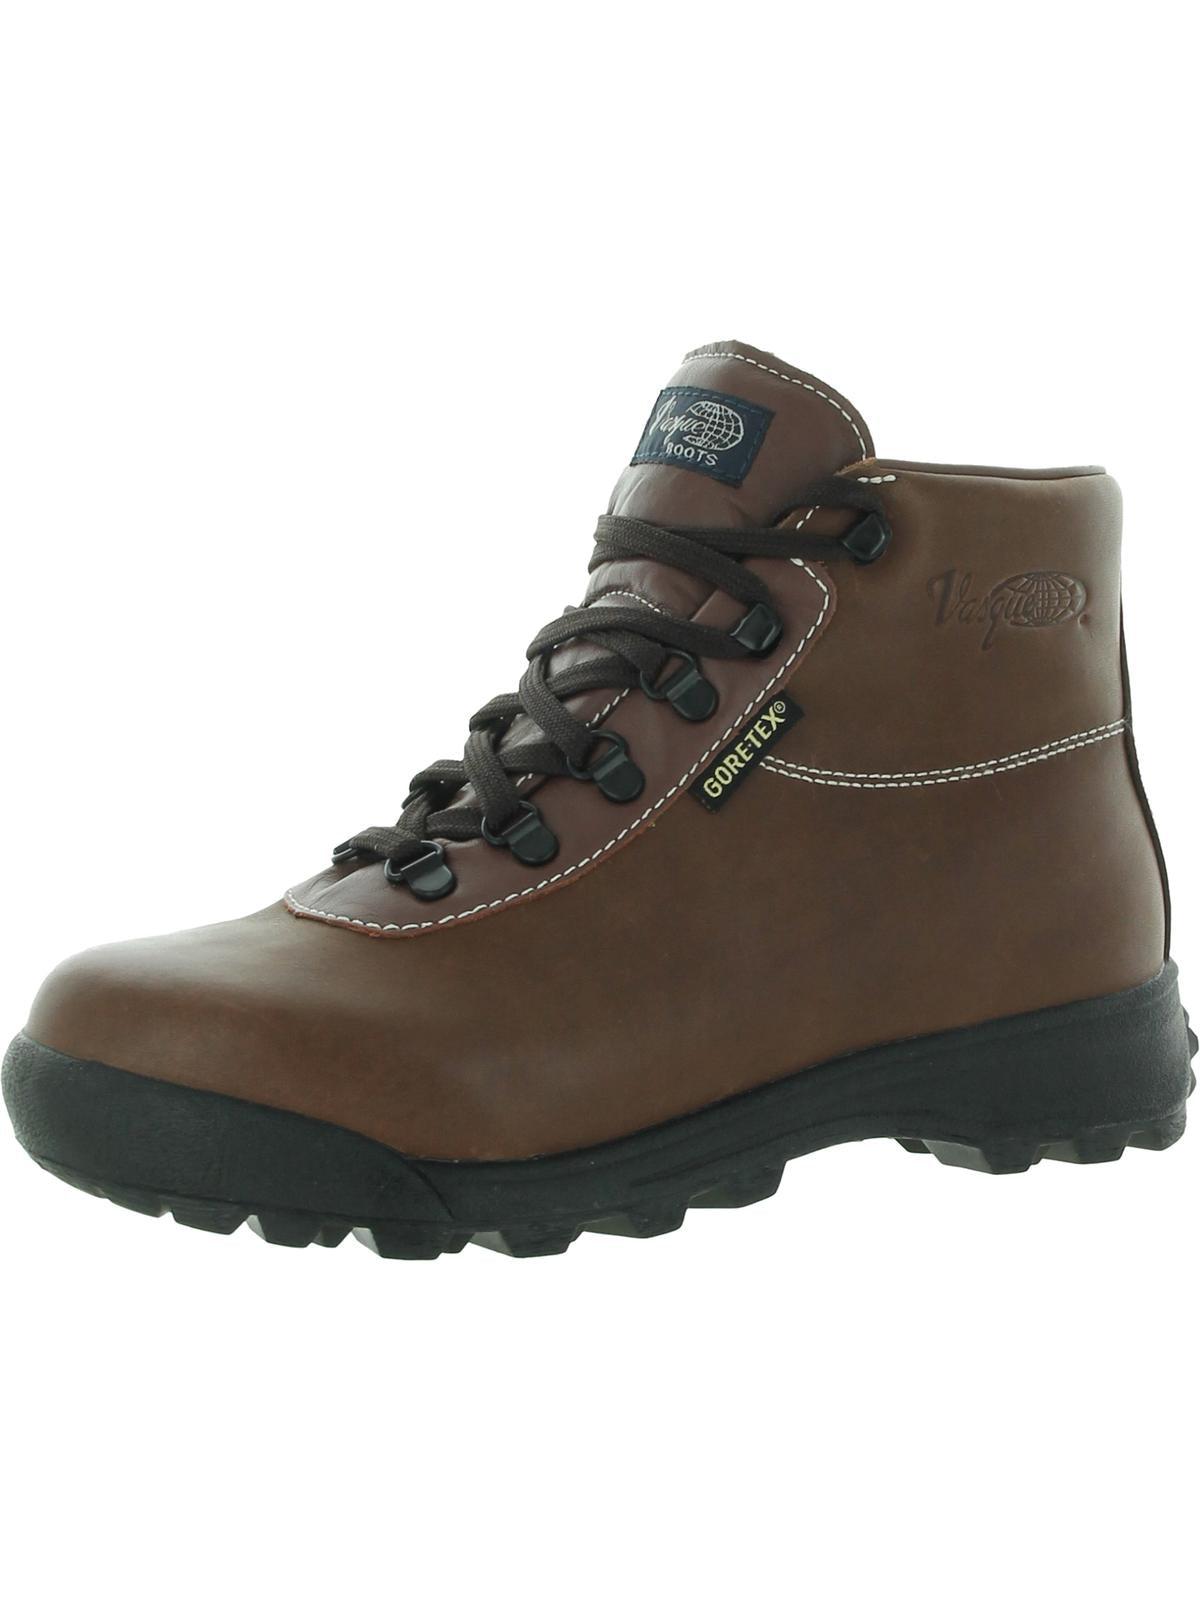 Vasque Sundowner Gtx Leather Lace Up Hiking Boots in Brown | Lyst